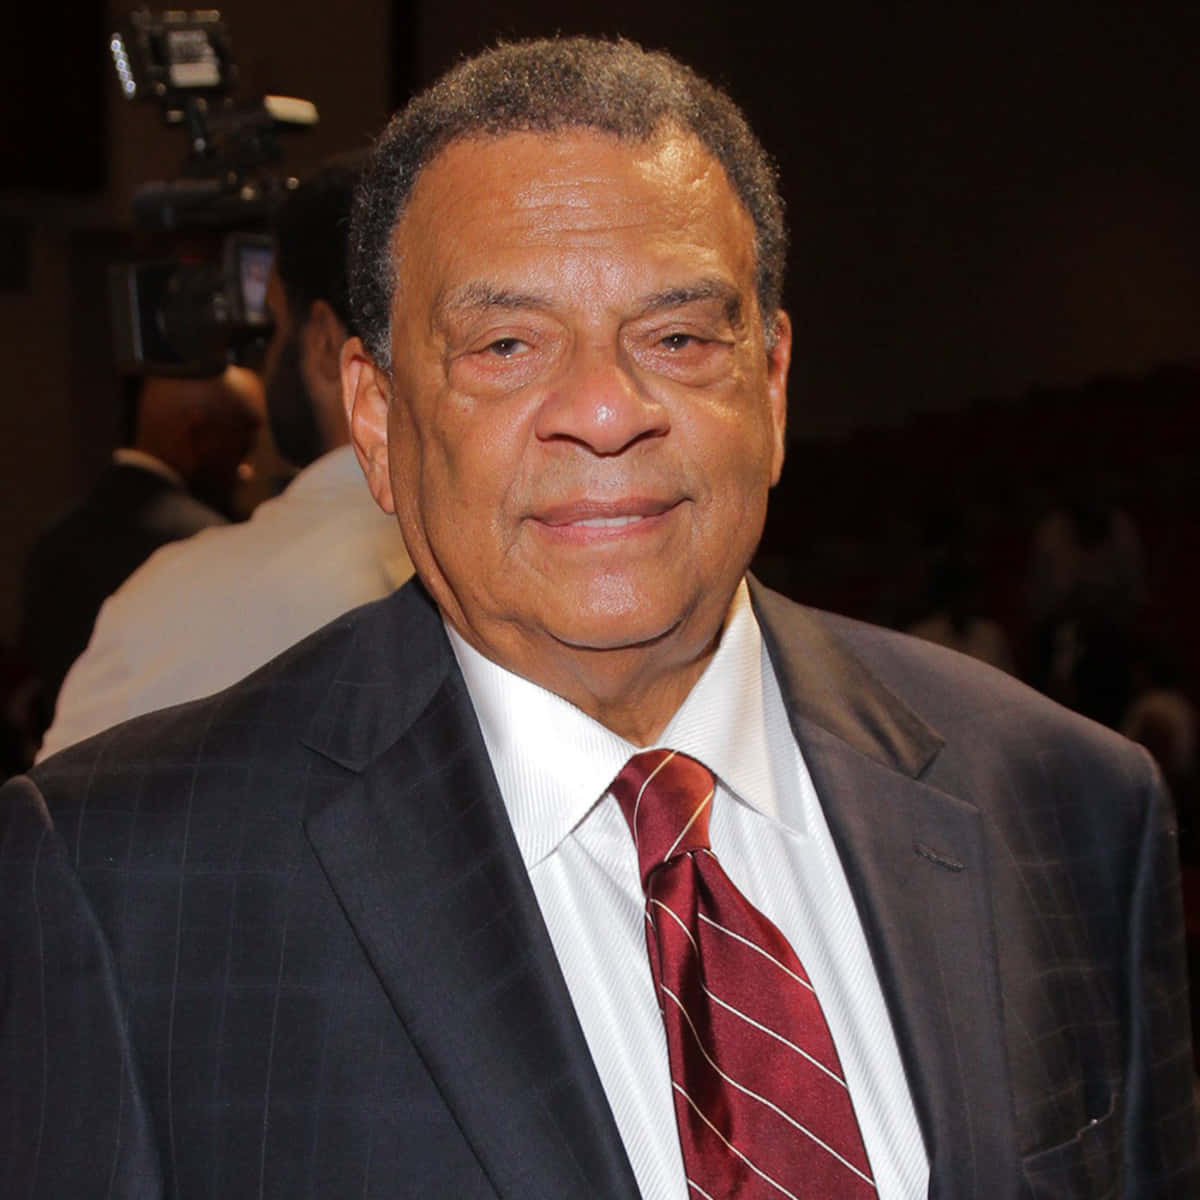 Andrewyoung Med En Röd Randig Slips. (this Sentence Could Be Used As A Description For A Wallpaper Featuring Andrew Young With A Red Striped Tie As The Main Focal Point.) Wallpaper